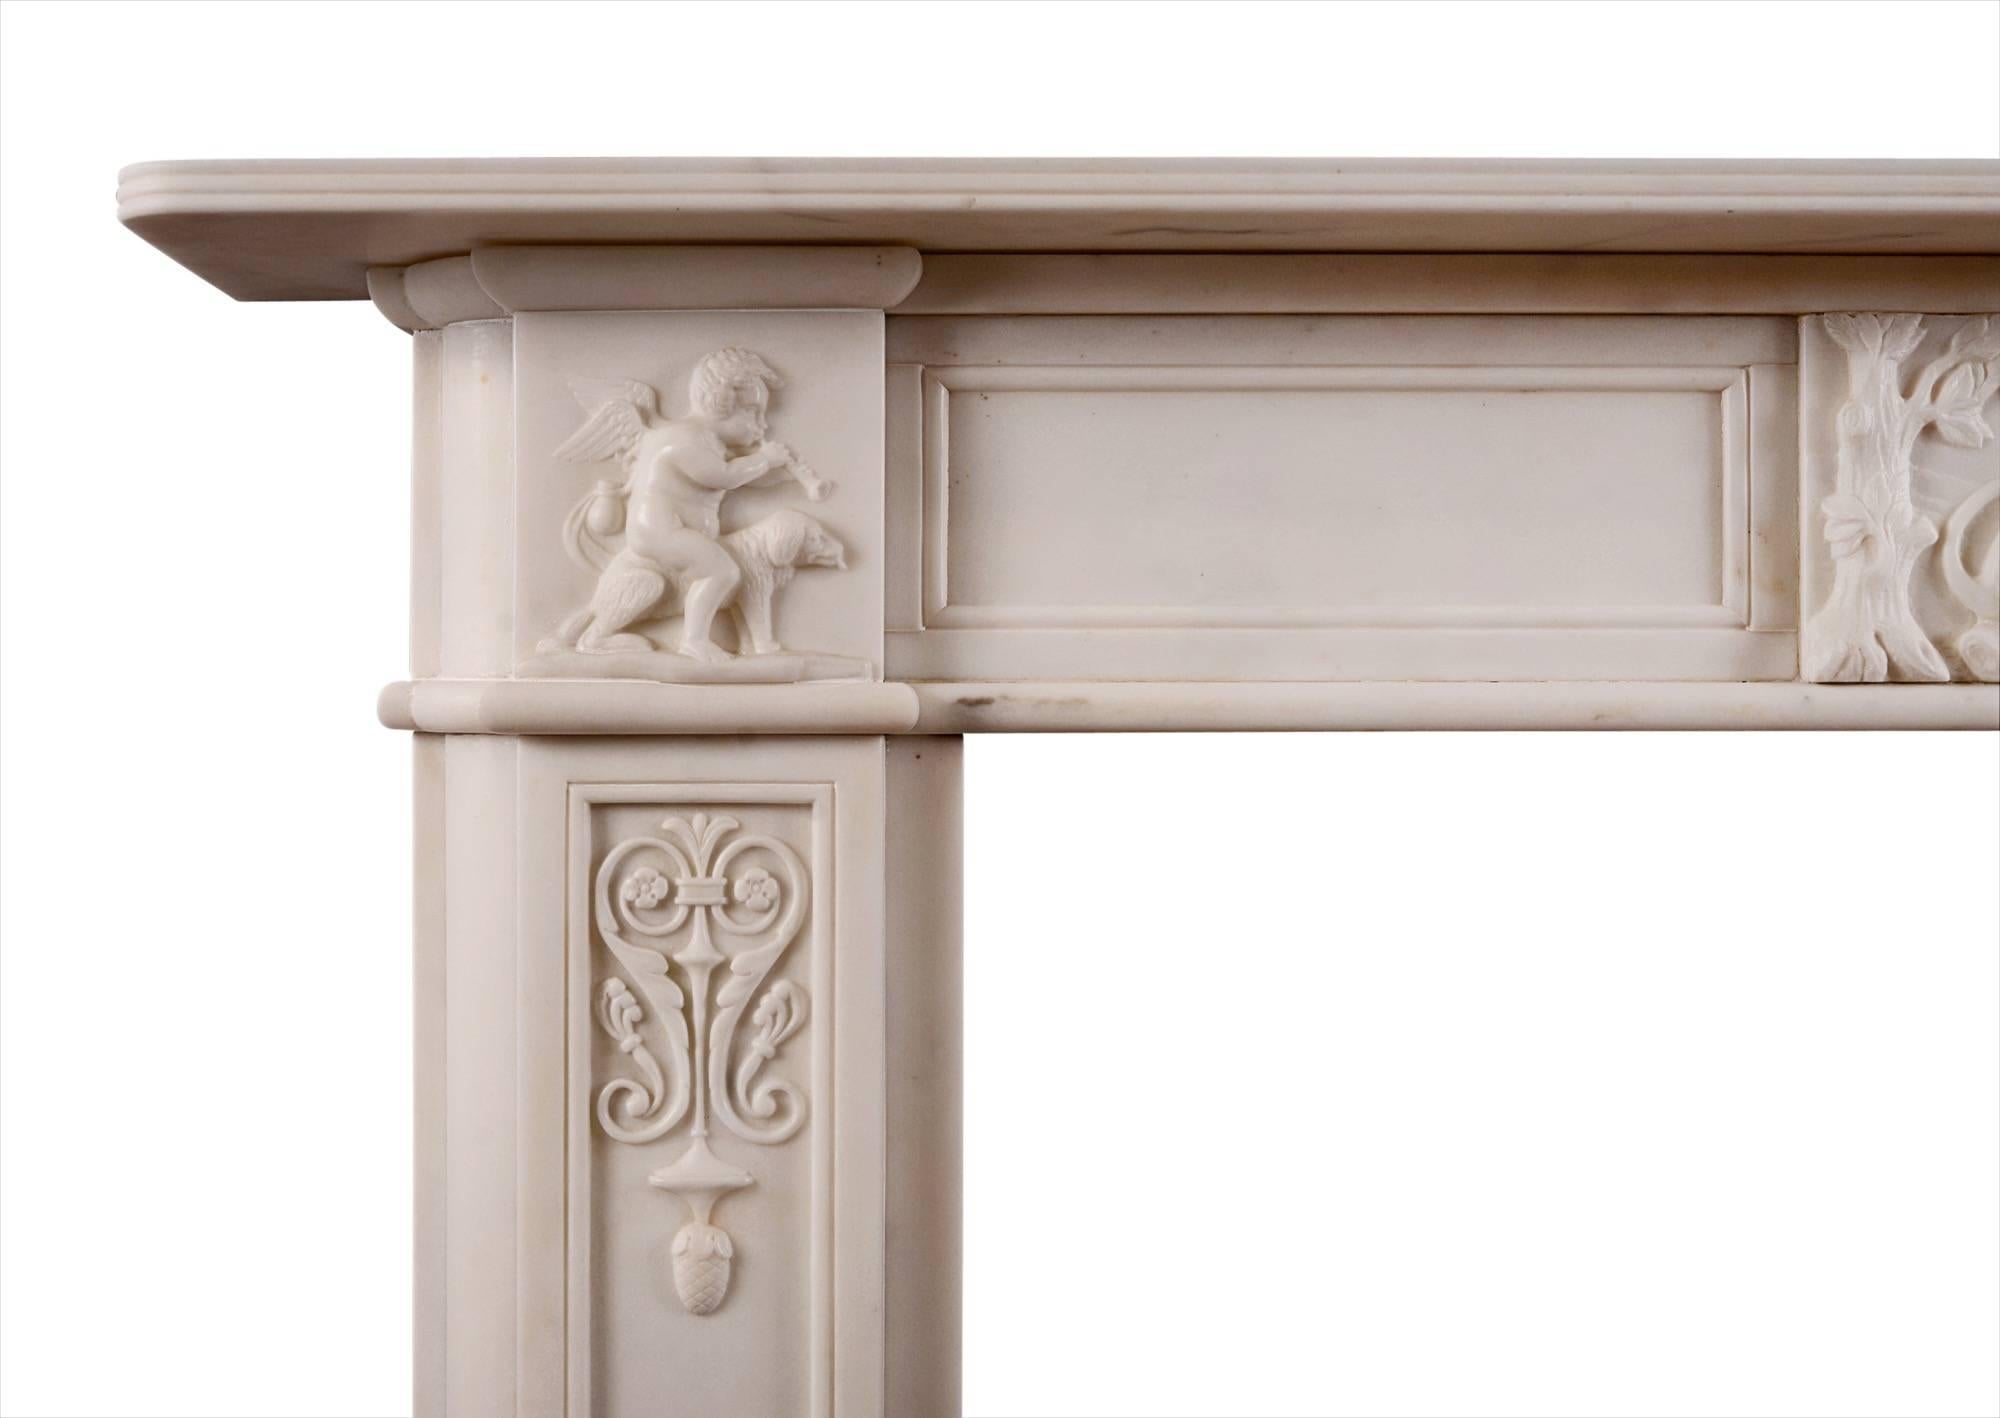 A period English Regency fireplace in good quality white statuary marble. The panelled frieze with carved centre plaque featuring reclining lion amongst nature setting, the end blocks with carved Putti and animals. The panelled jambs carved with